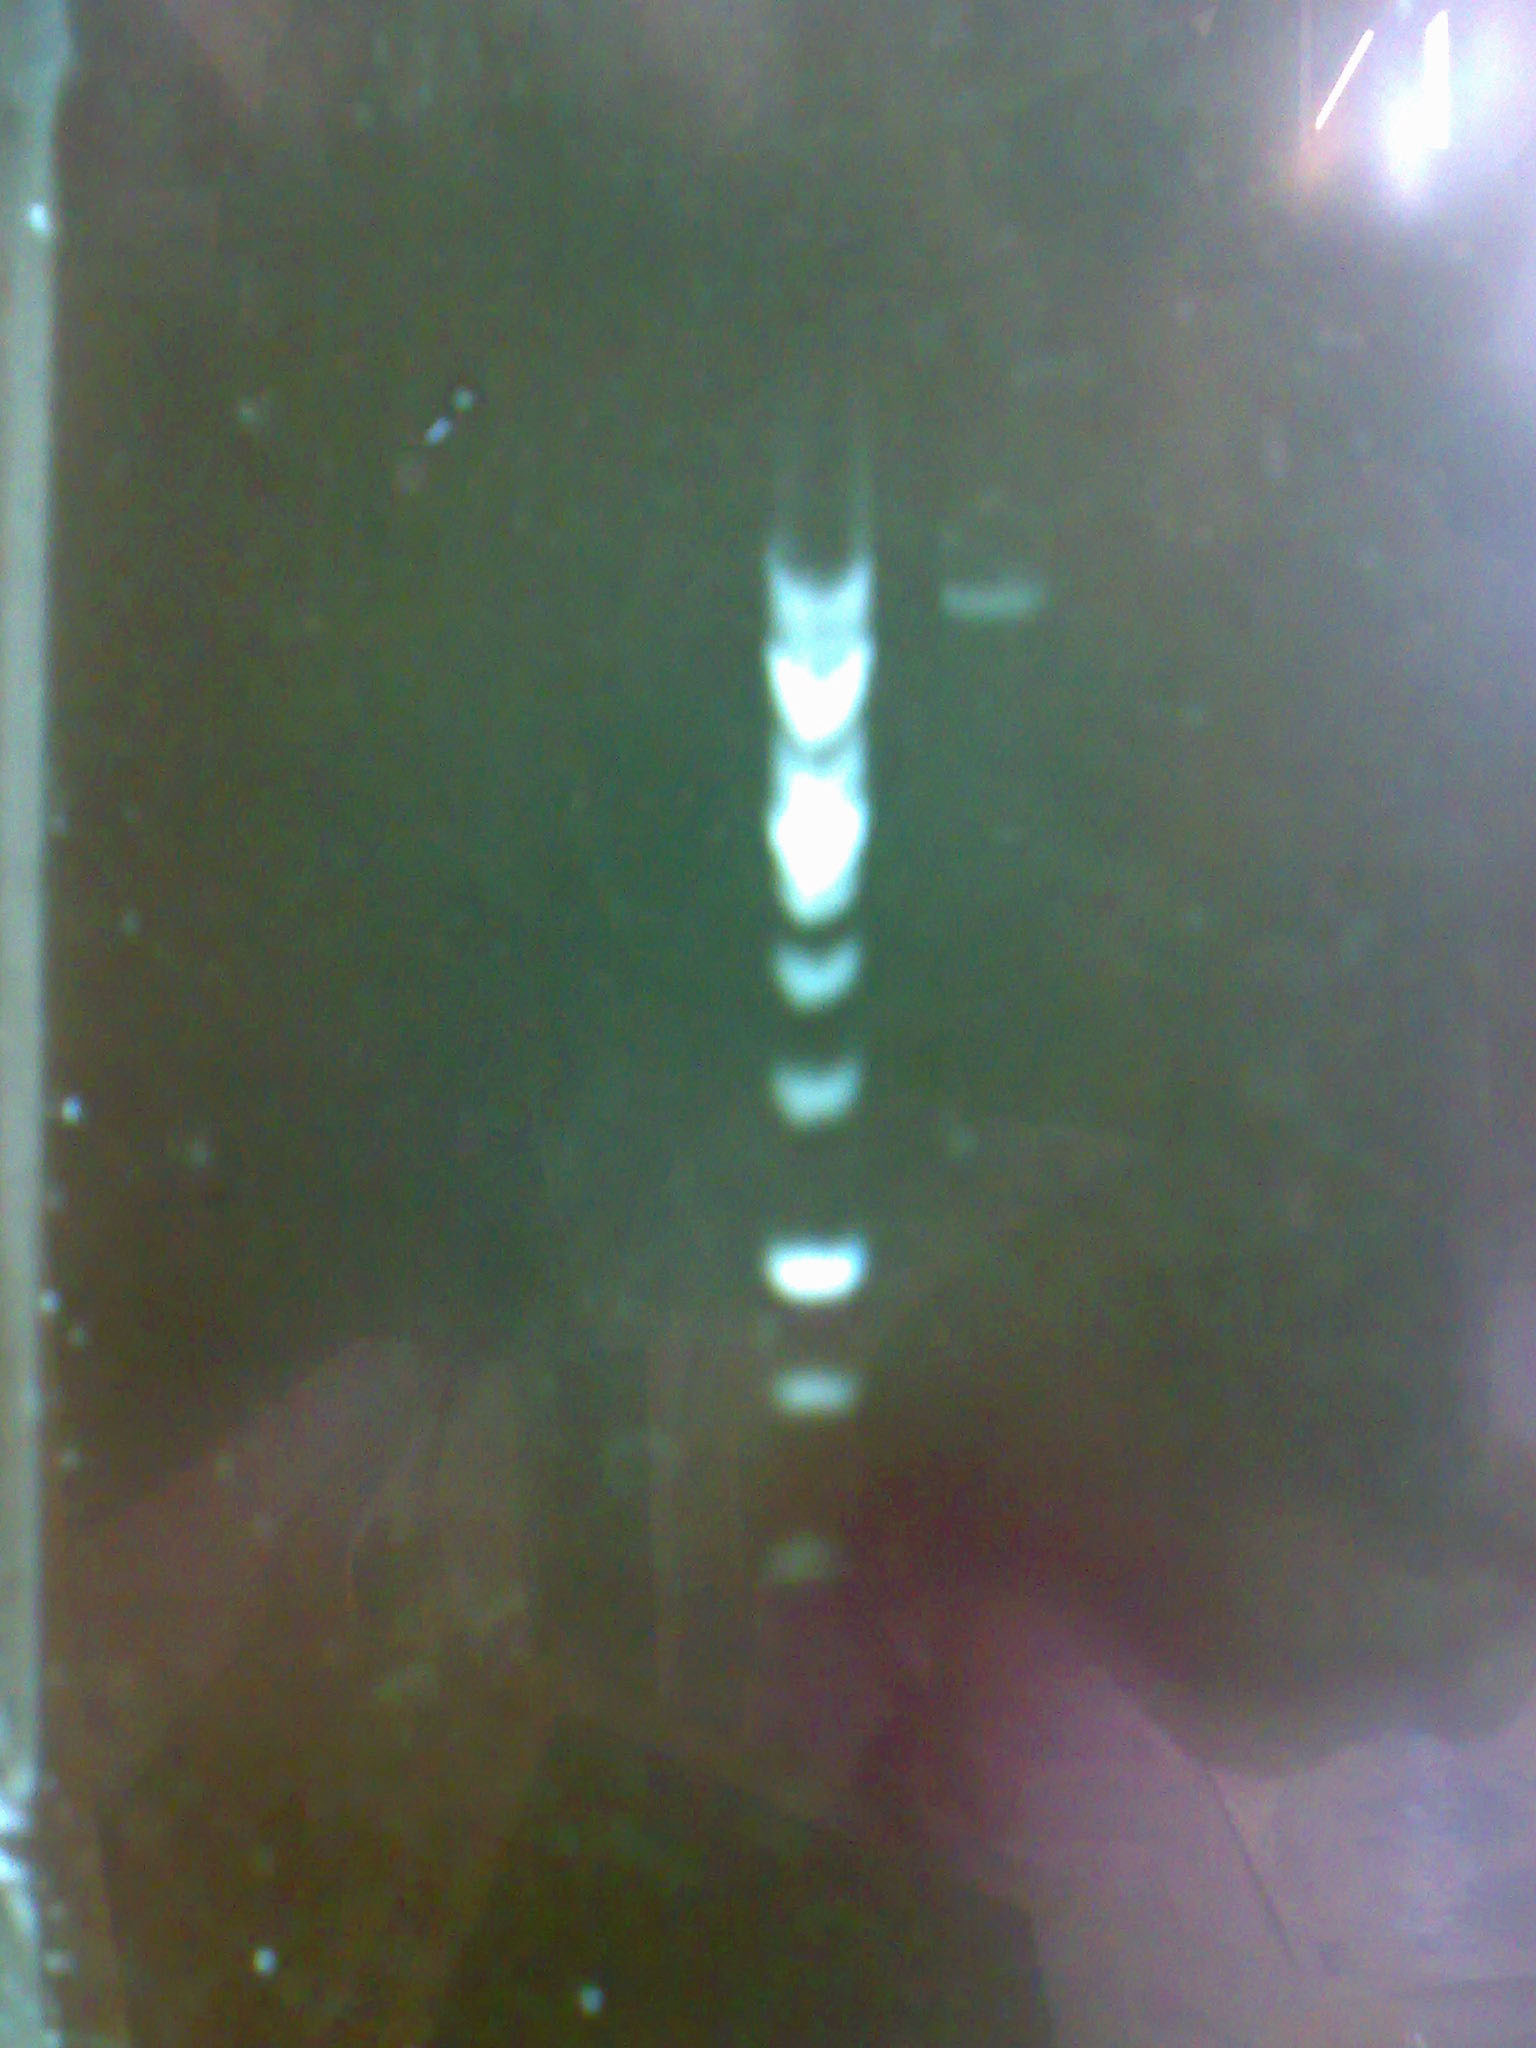 Electrophoresis of the purified pM2 plasmid.